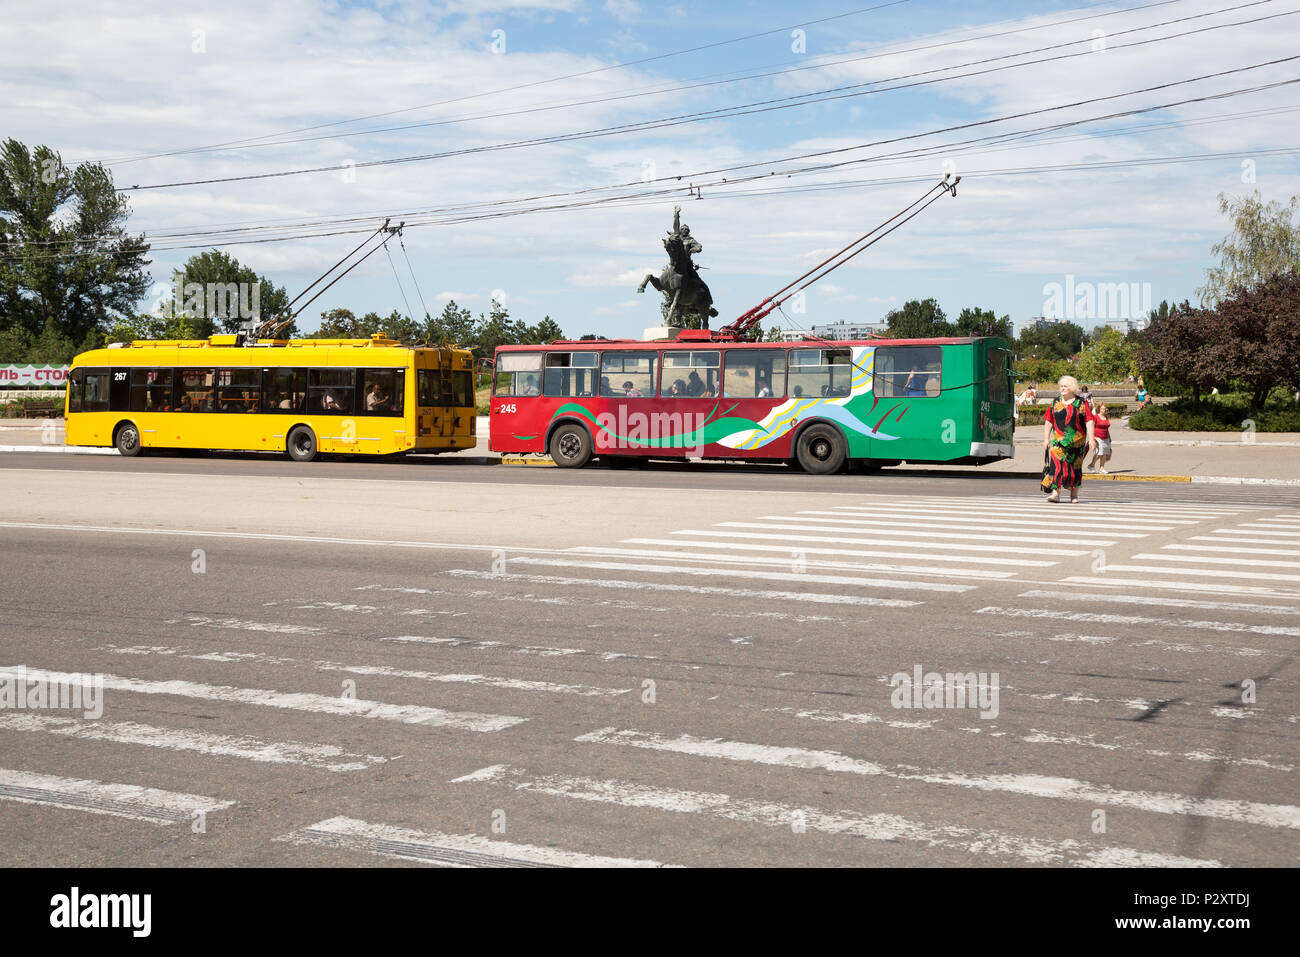 25.08.2016, Tiraspol, Transnistria, Moldova - Trolleybuses, one red-green in the transnistrian colors, older lady in color matching dress crosses Zebr Stock Photo